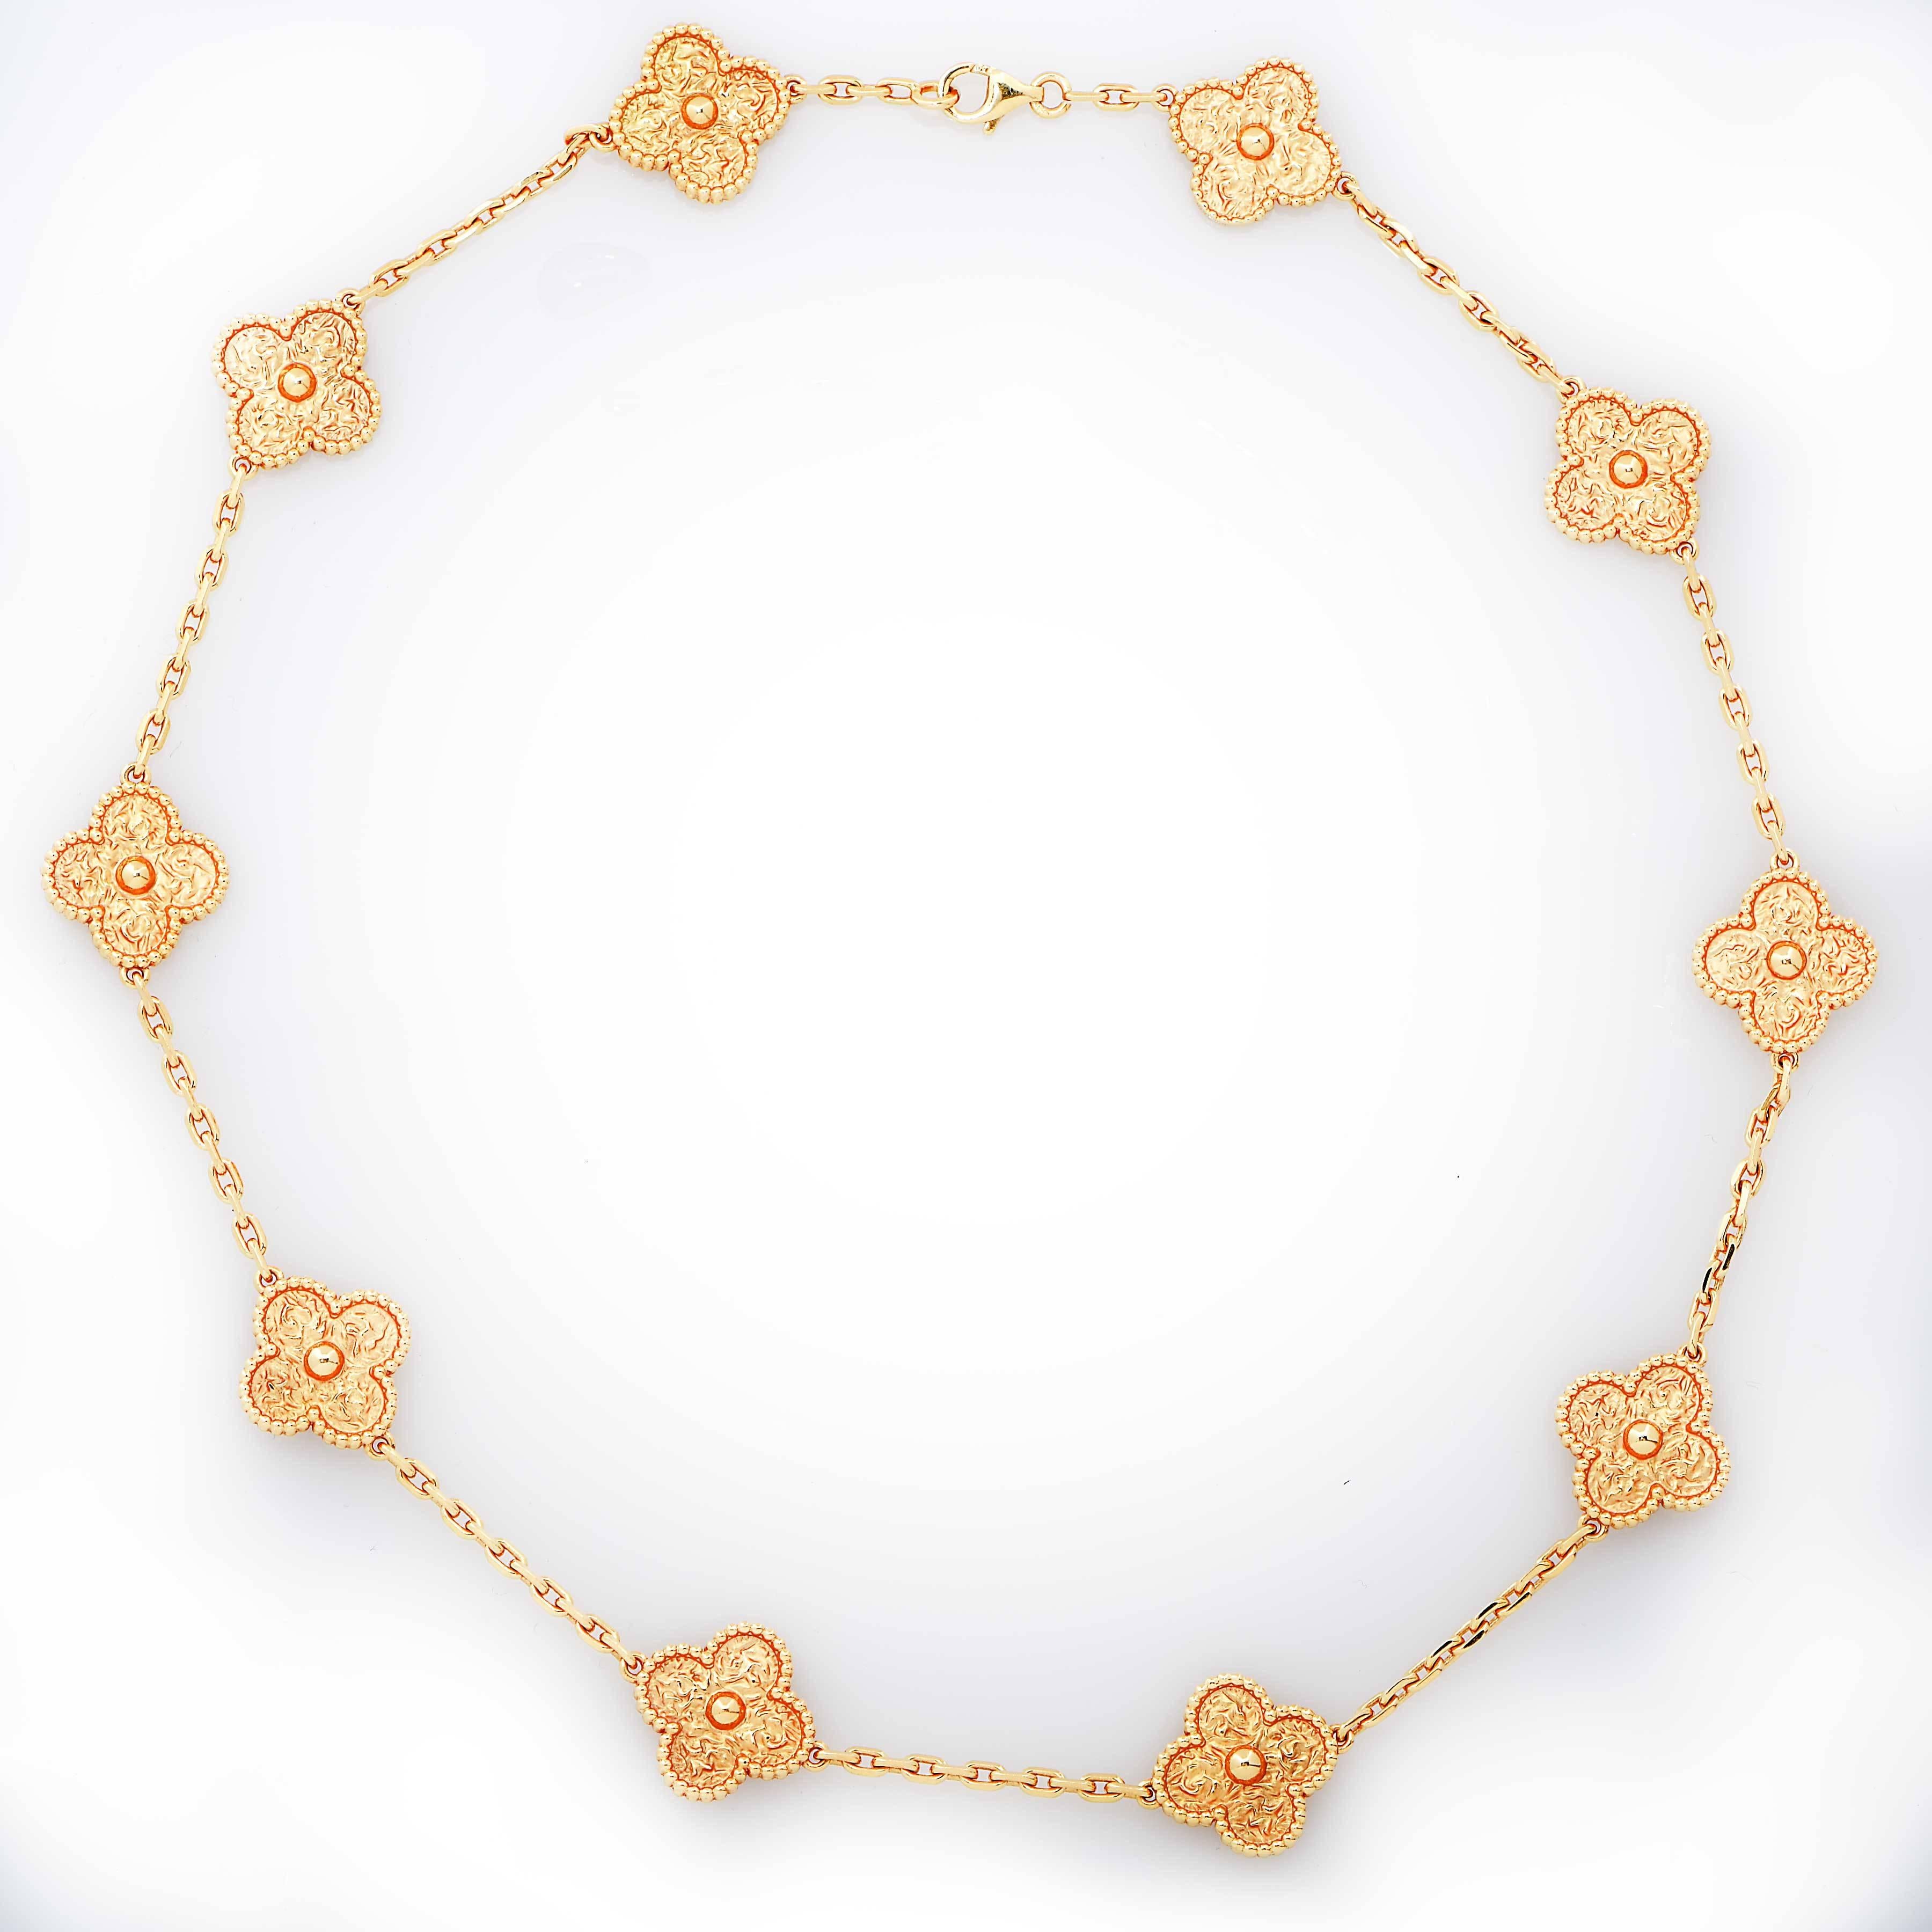 Faithful to the very first Alhambra® jewel created in 1968, the Vintage Alhambra creations by Van Cleef & Arpels are distinguished by their unique, timeless elegance. Inspired by the clover leaf, these icons of luck are adorned with a border of